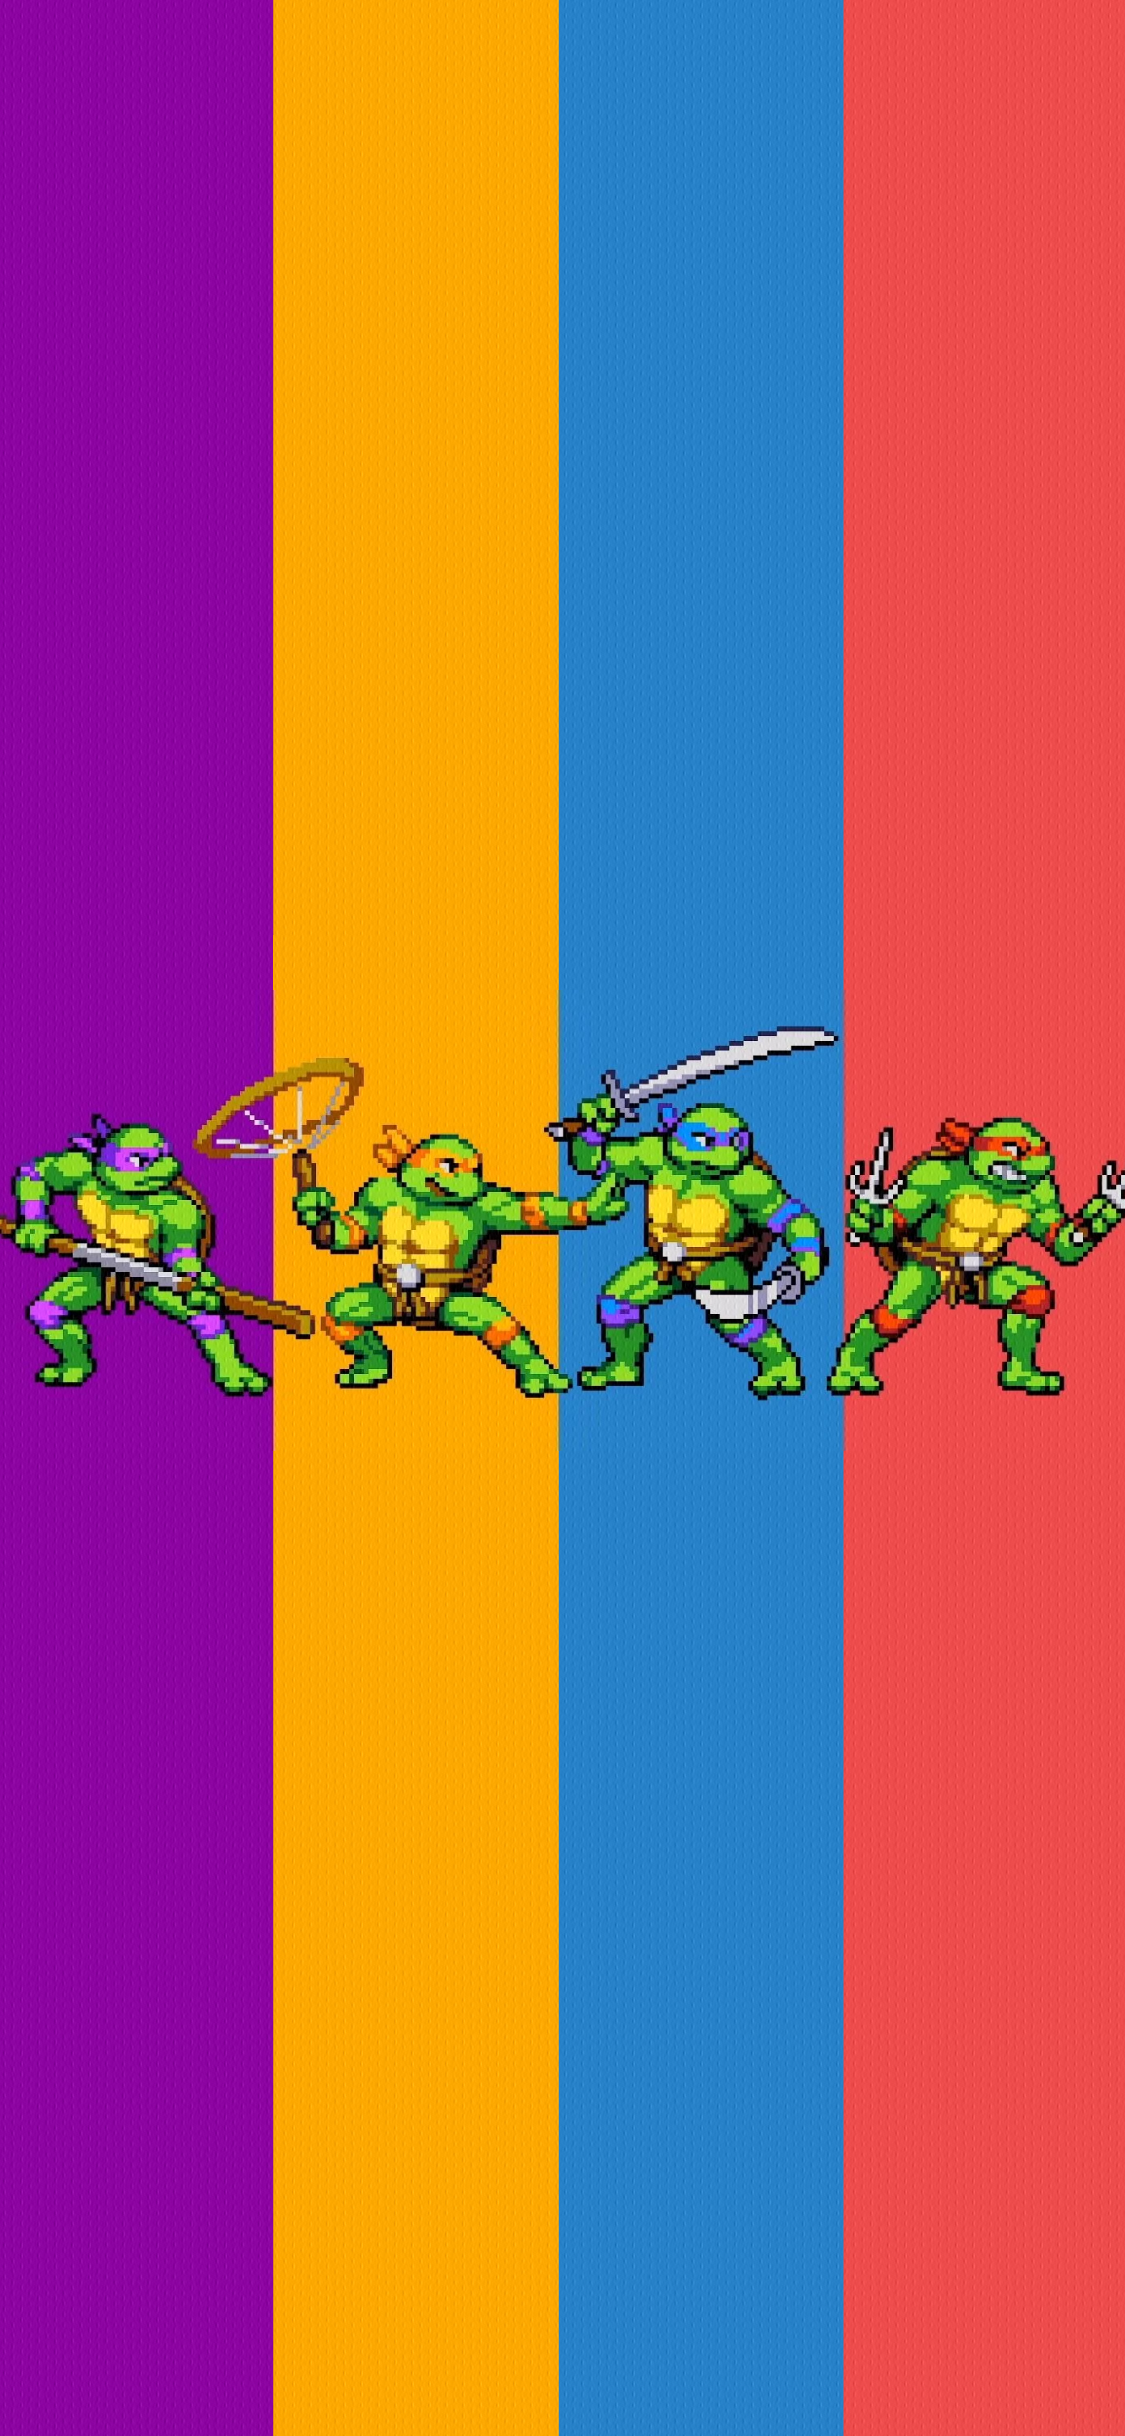 TMNT on X Radical TMNT wallpapers for your phone Which is your  favorite httpstcoPhQGH5r2fc  X